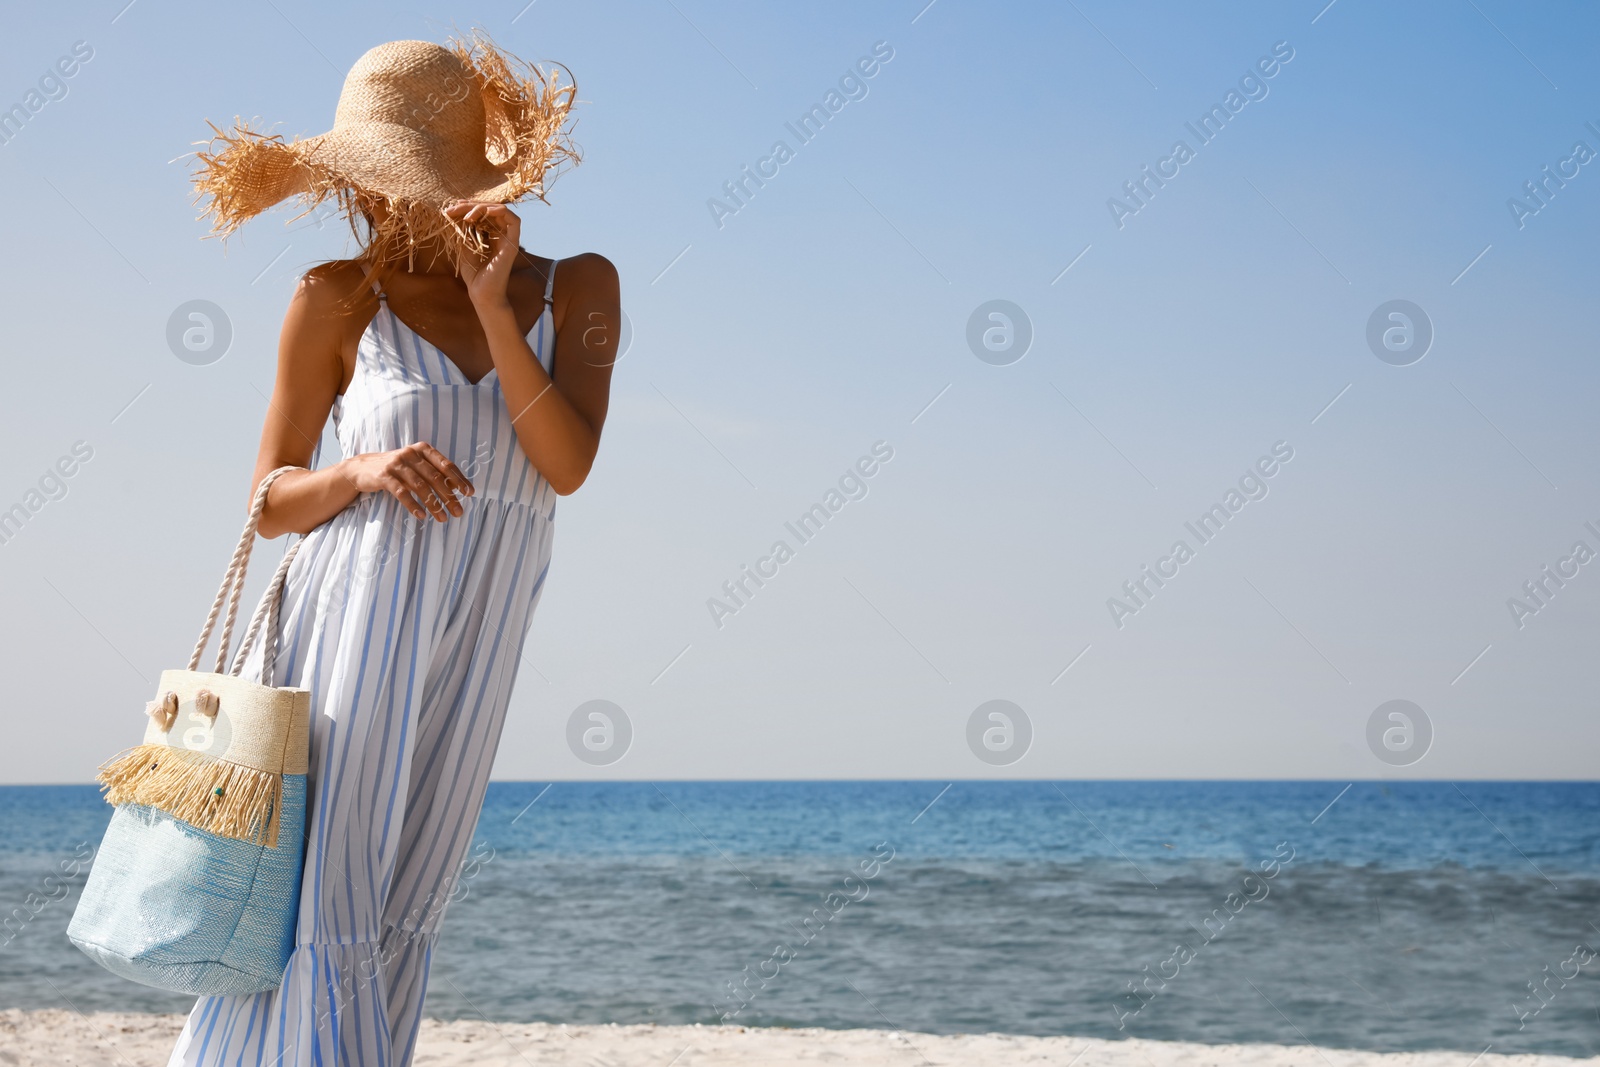 Photo of Woman with beach bag walking on sand near sea. Space for text